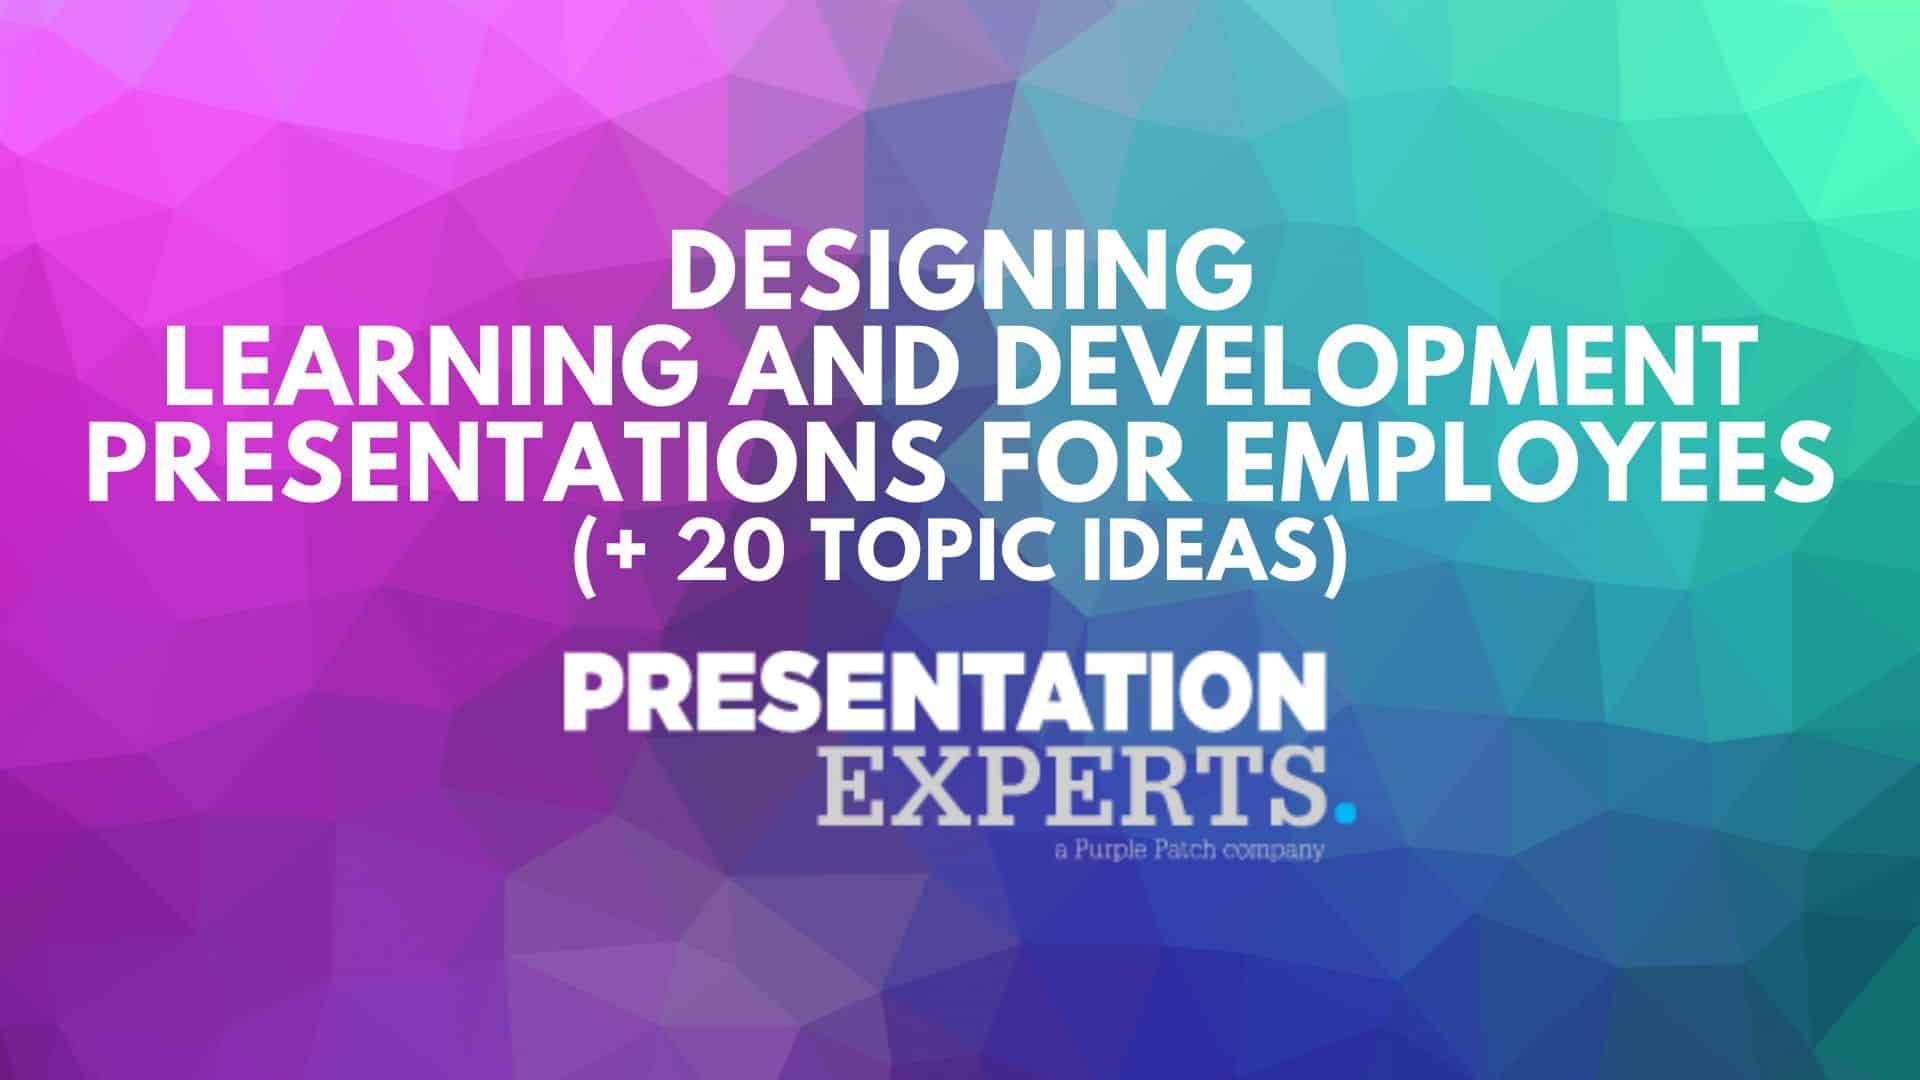 Designing Learning and Development Presentations for Employees (+ 20 Topic Ideas)